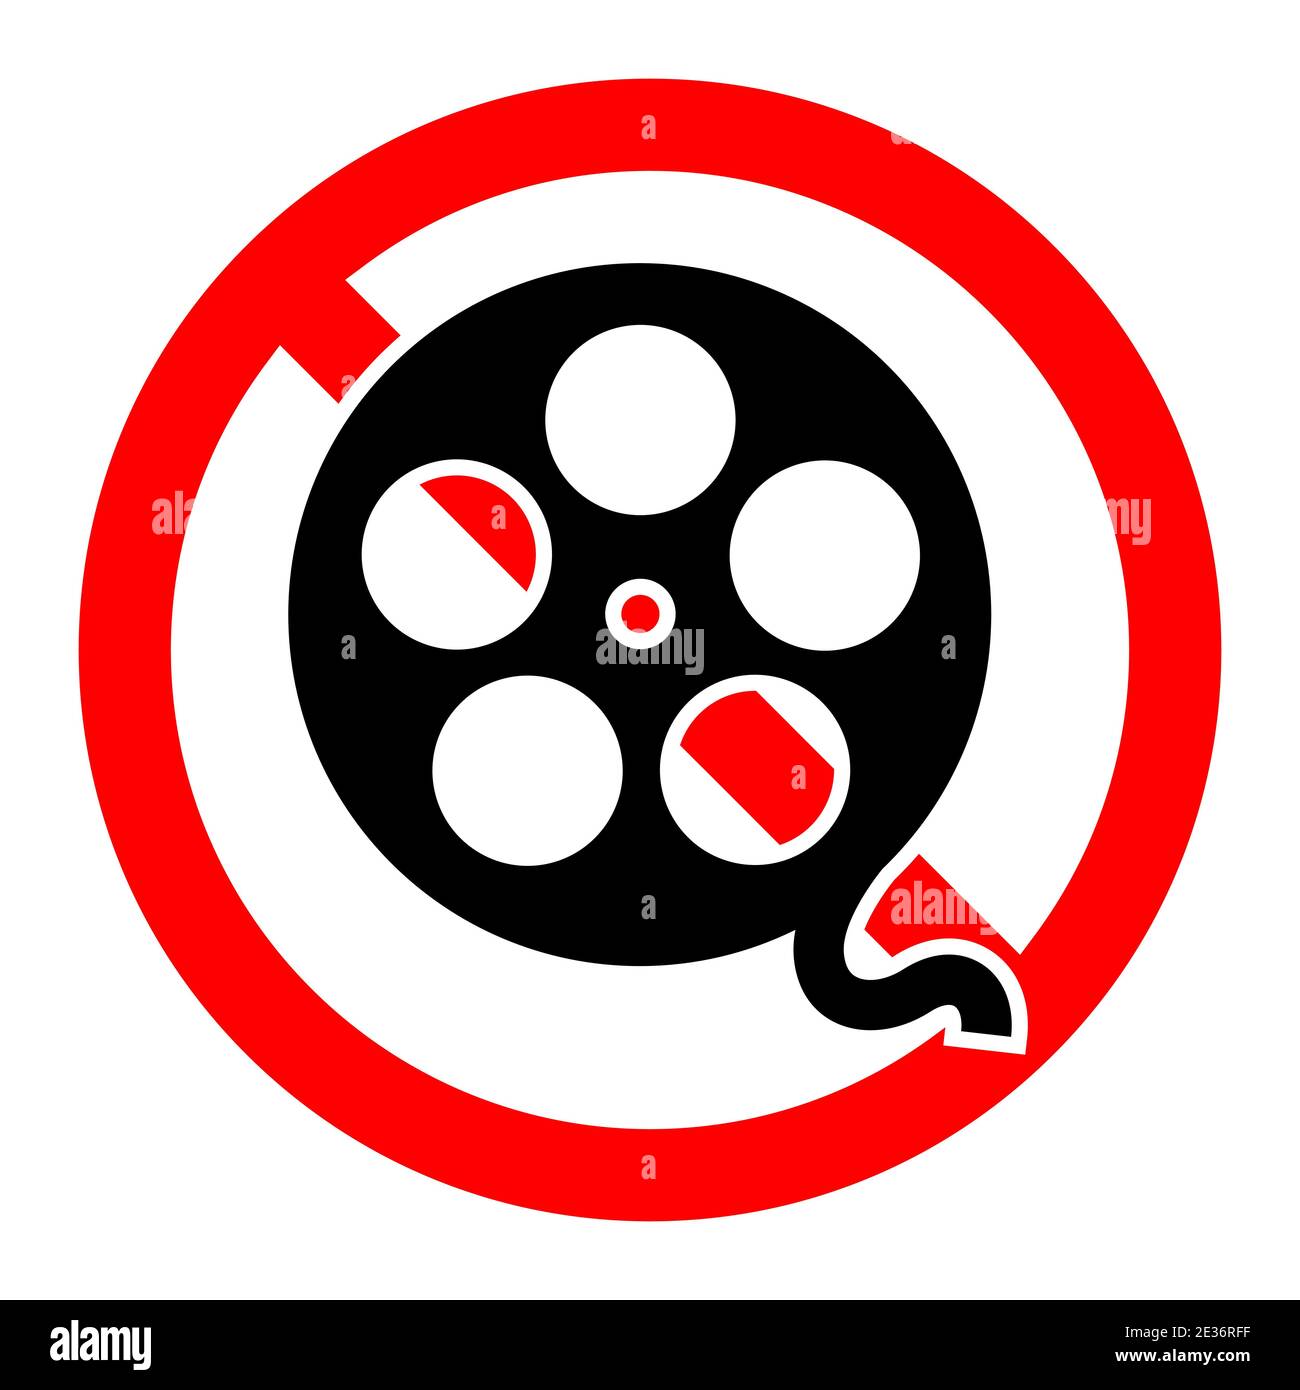 Movie viewing is forbidden. Movie ban icon. Cinema is prohibited. Stop or ban red round sign with movie icon. Vector illustration. Stock Vector